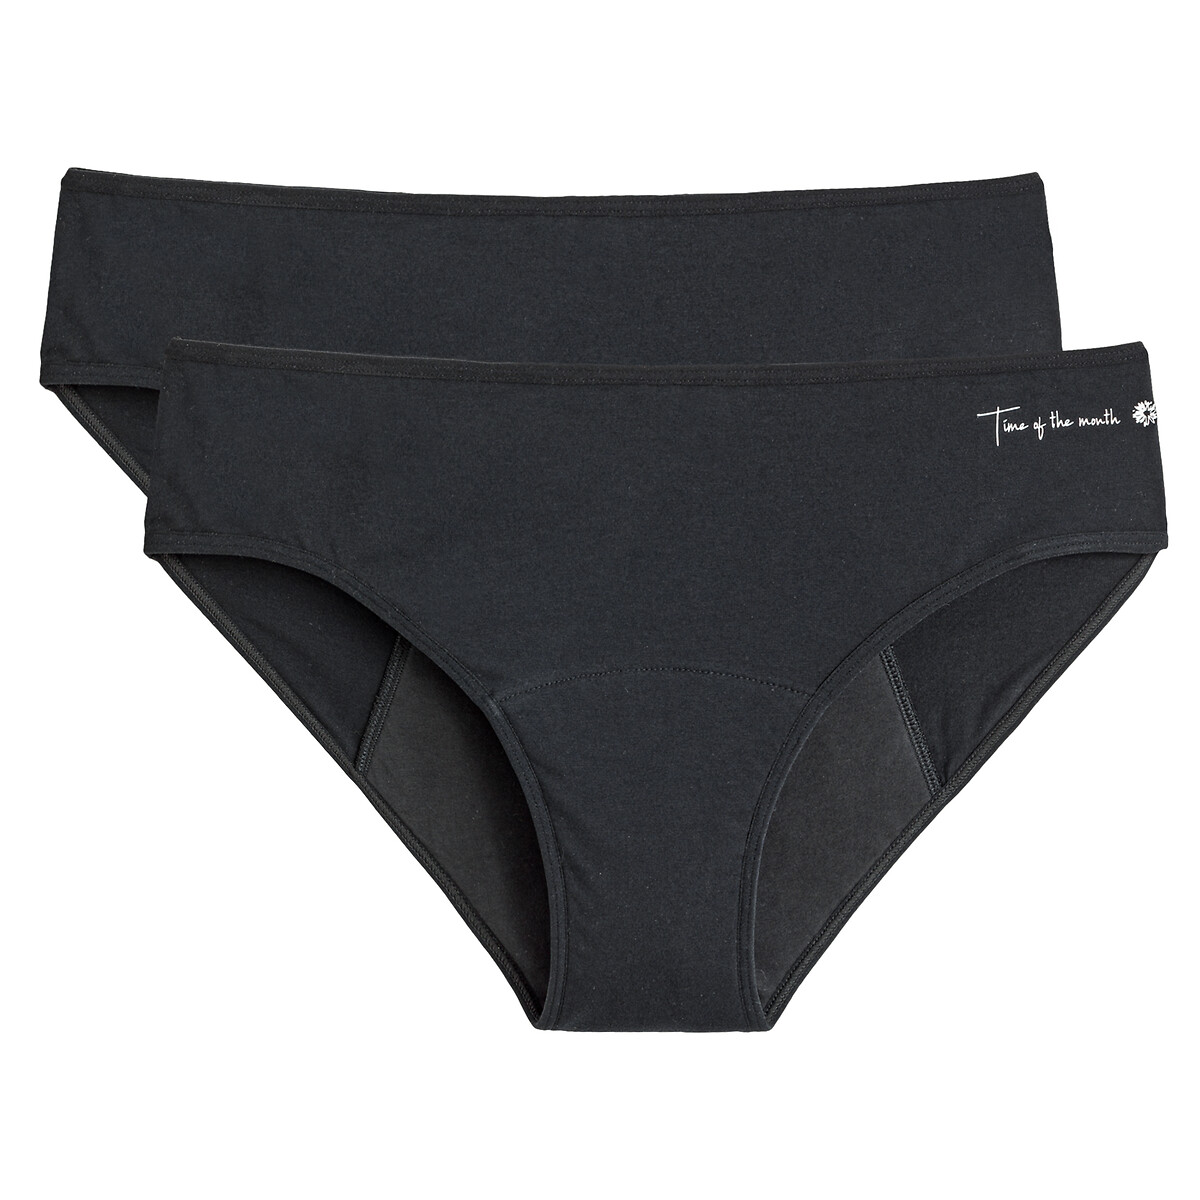 Pack of 2 Period Knickers in Cotton, Heavy Flow